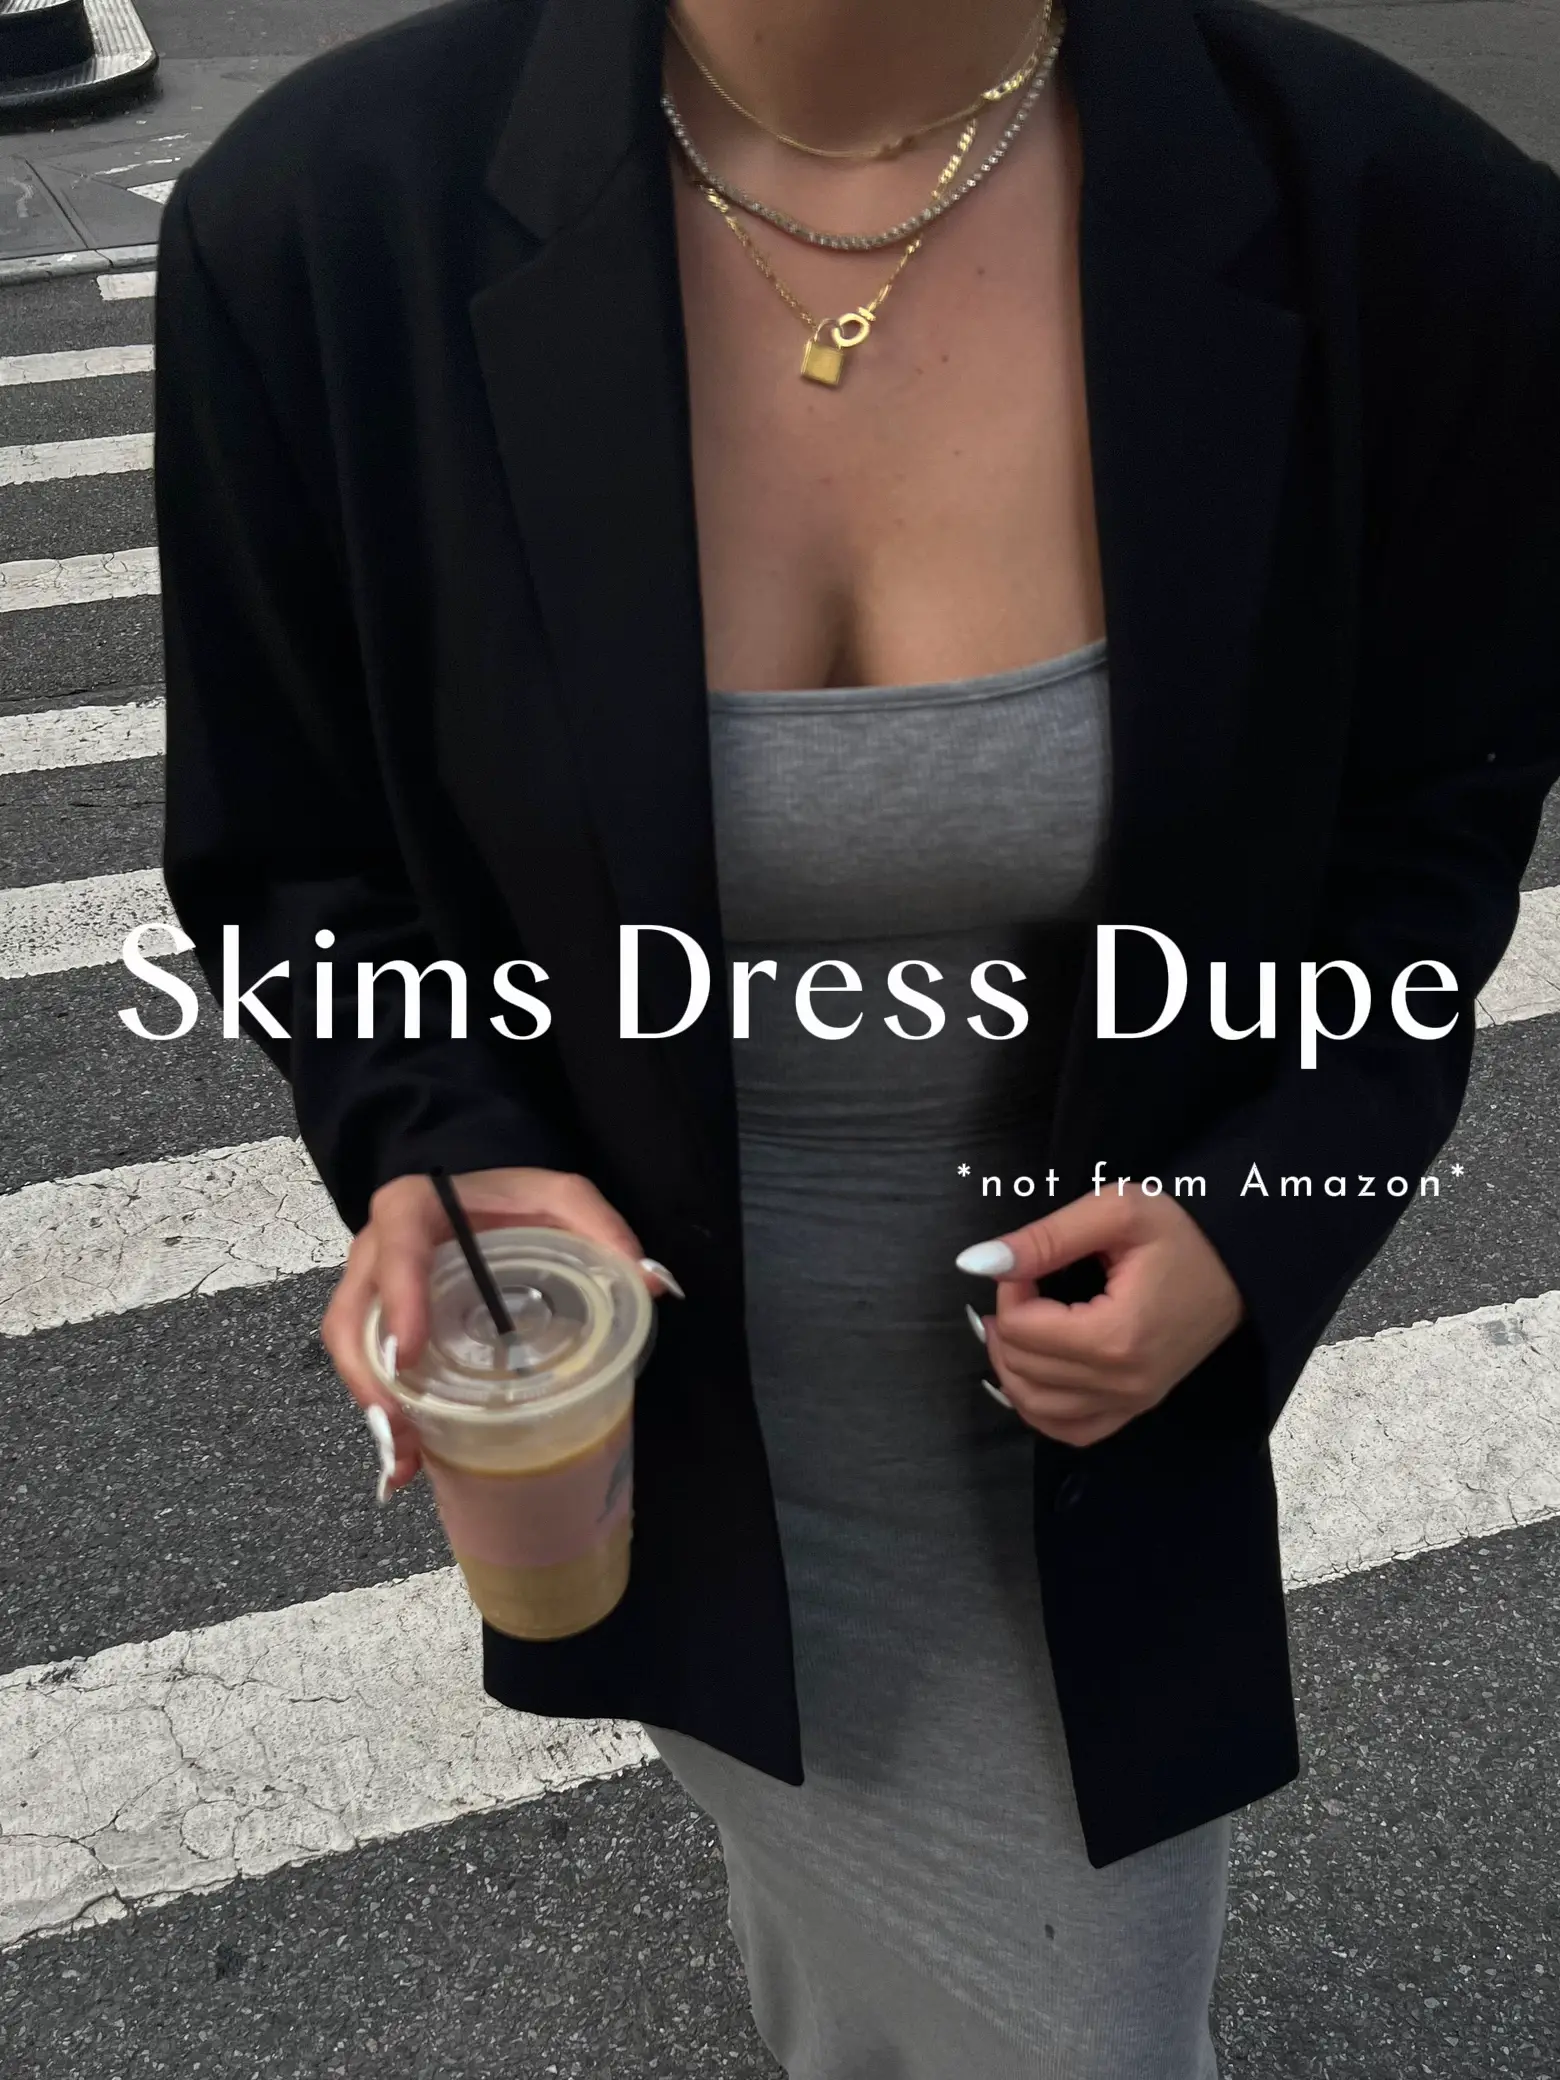 Skims Dress Dupe, Gallery posted by samfritzinger